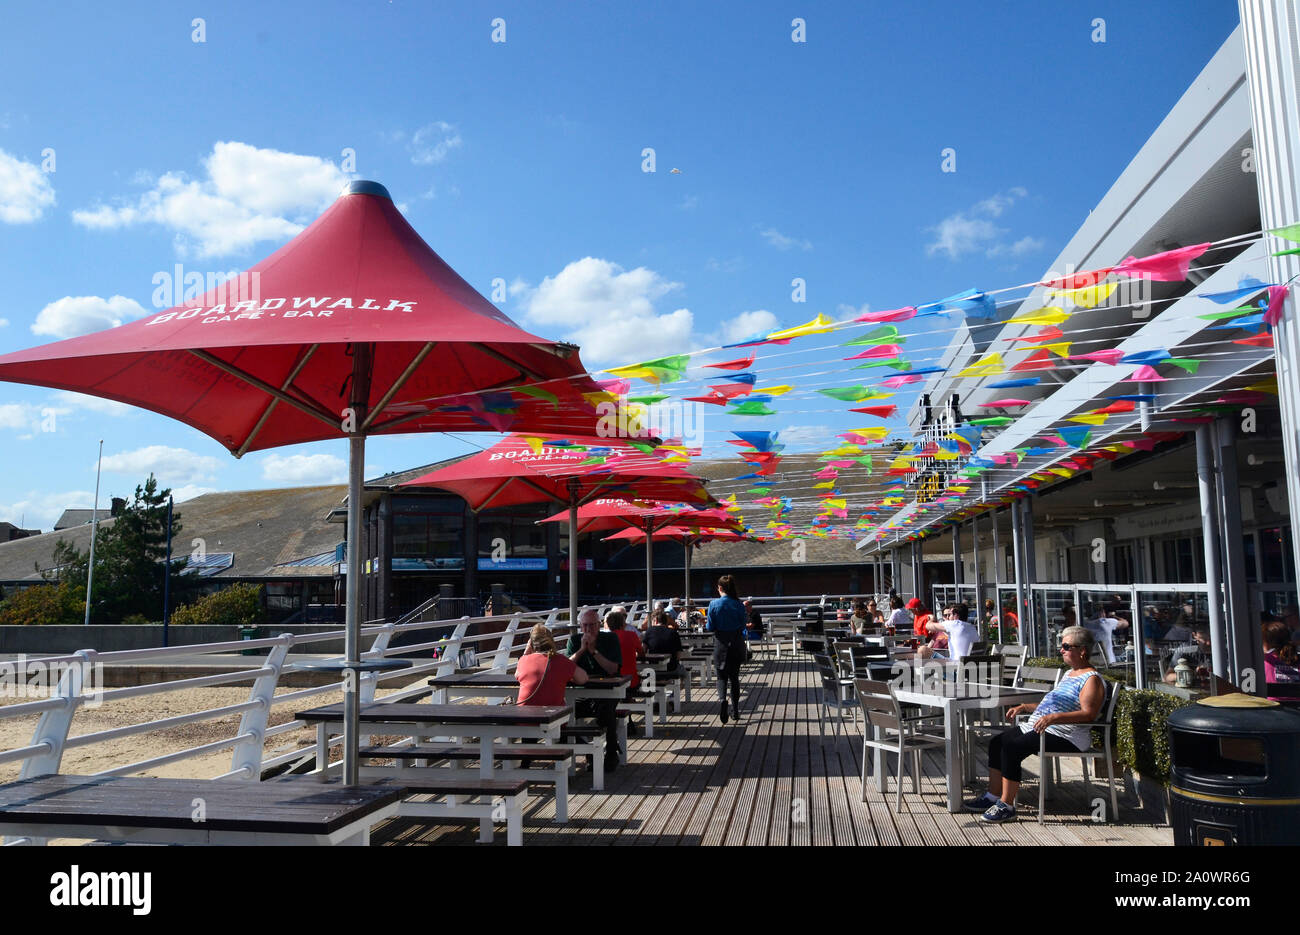 The Boardwalk Cafe Bar on Felixstowe Pier, Felixstowe Seafront, Suffolk, UK. This new pier was completed  / opened in August 2017 Stock Photo